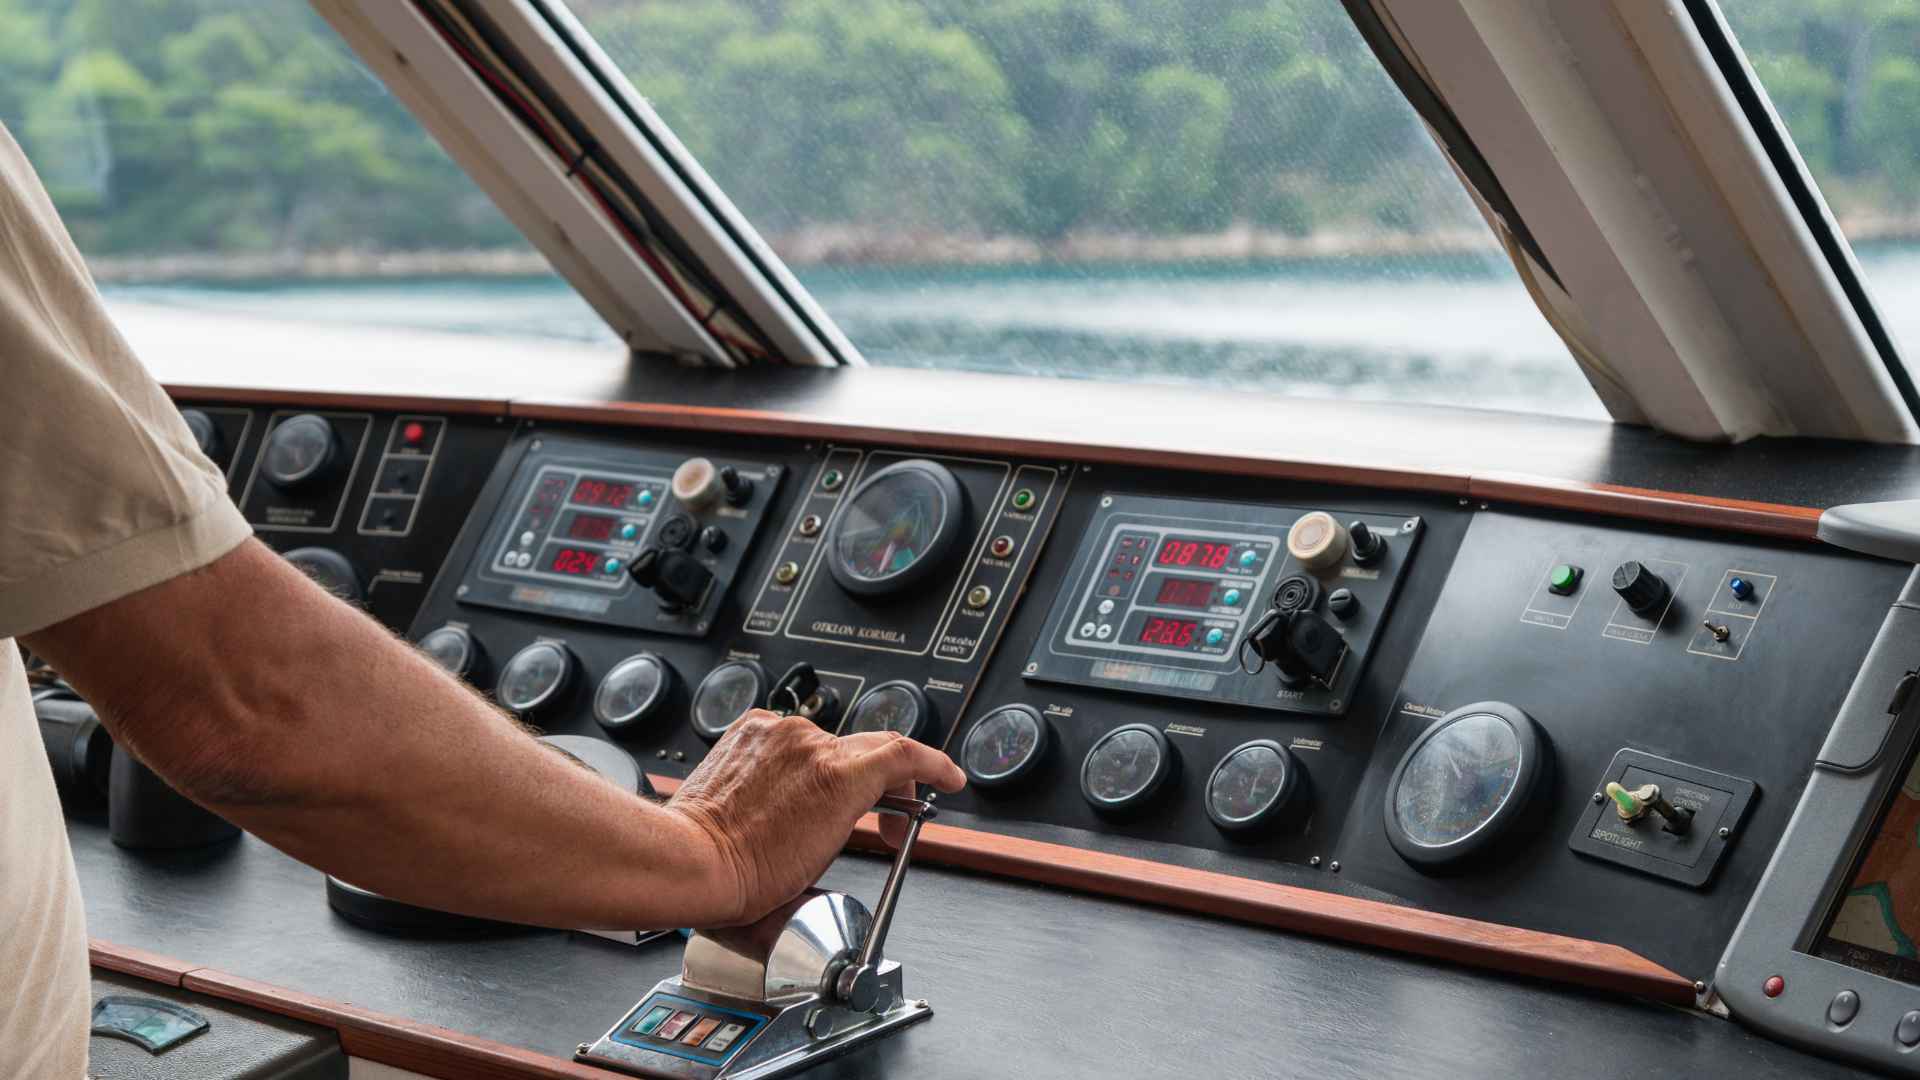 how to become a yacht captain reddit